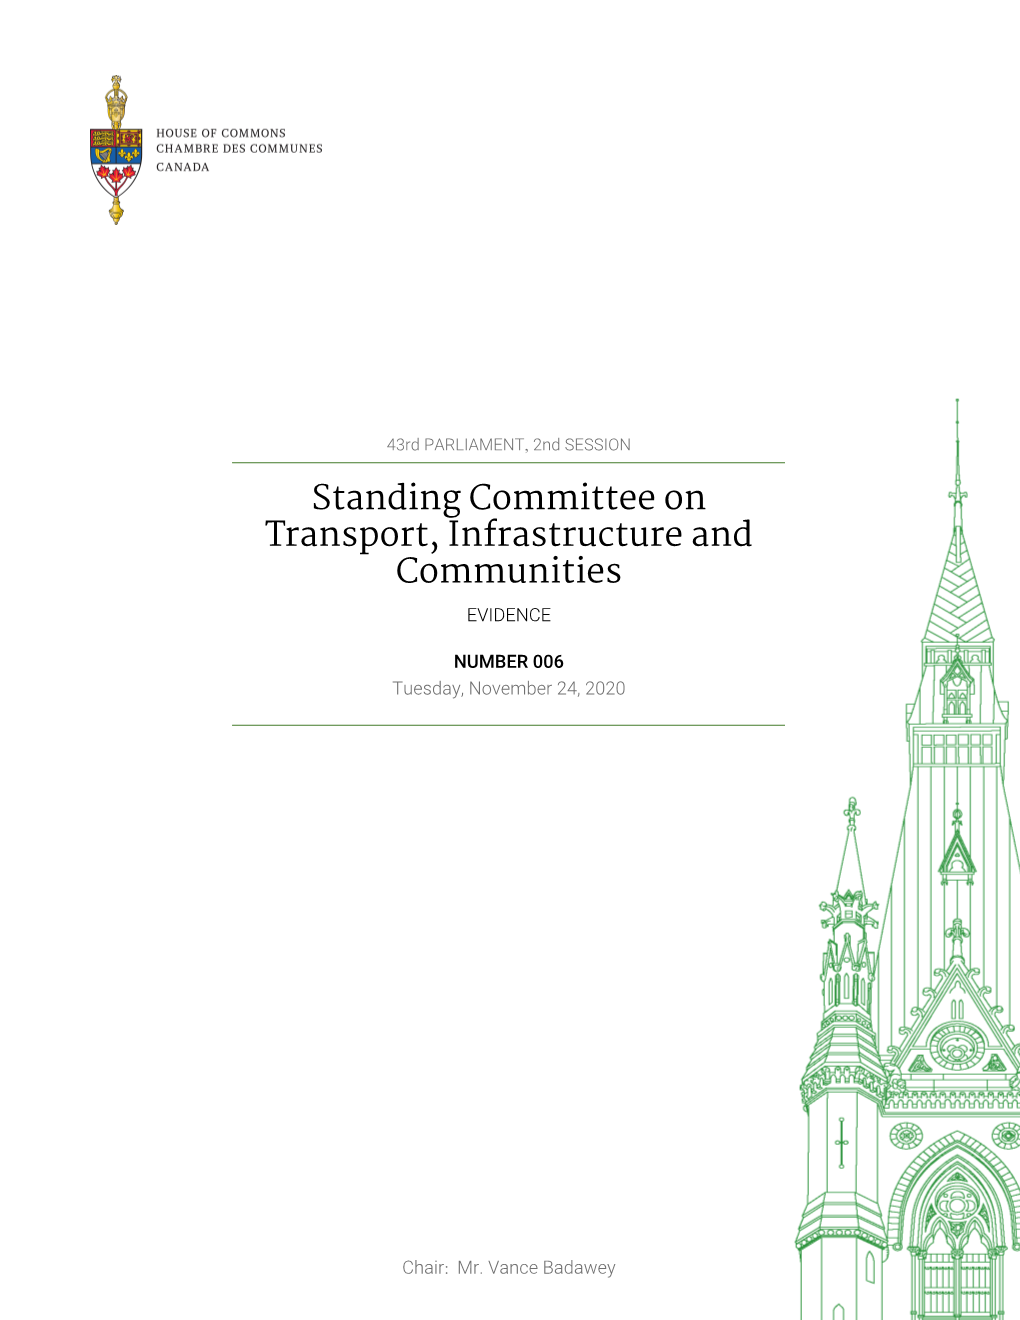 Evidence of the Standing Committee on Transport, Infrastructure And